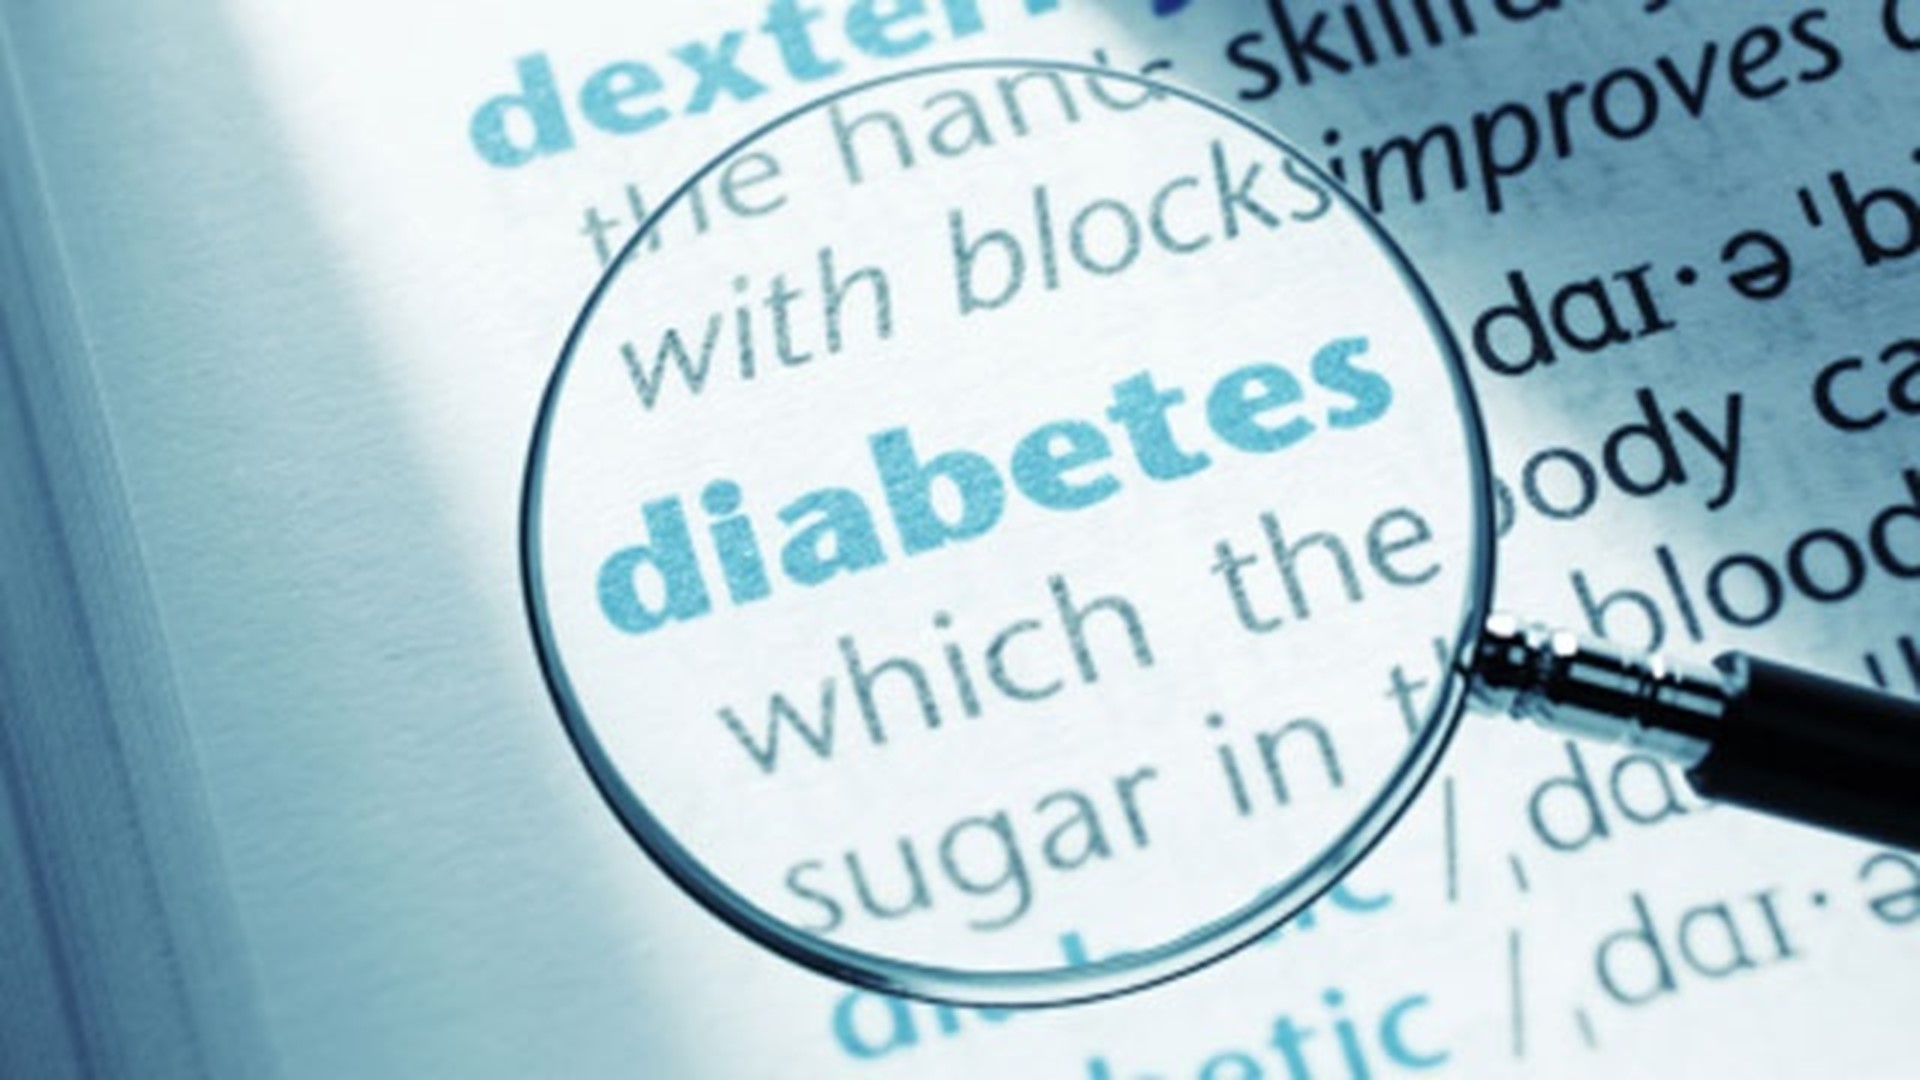 Let's talk about Diabetes. One in seven Alabamians has it, and nationwide it's one in nine.